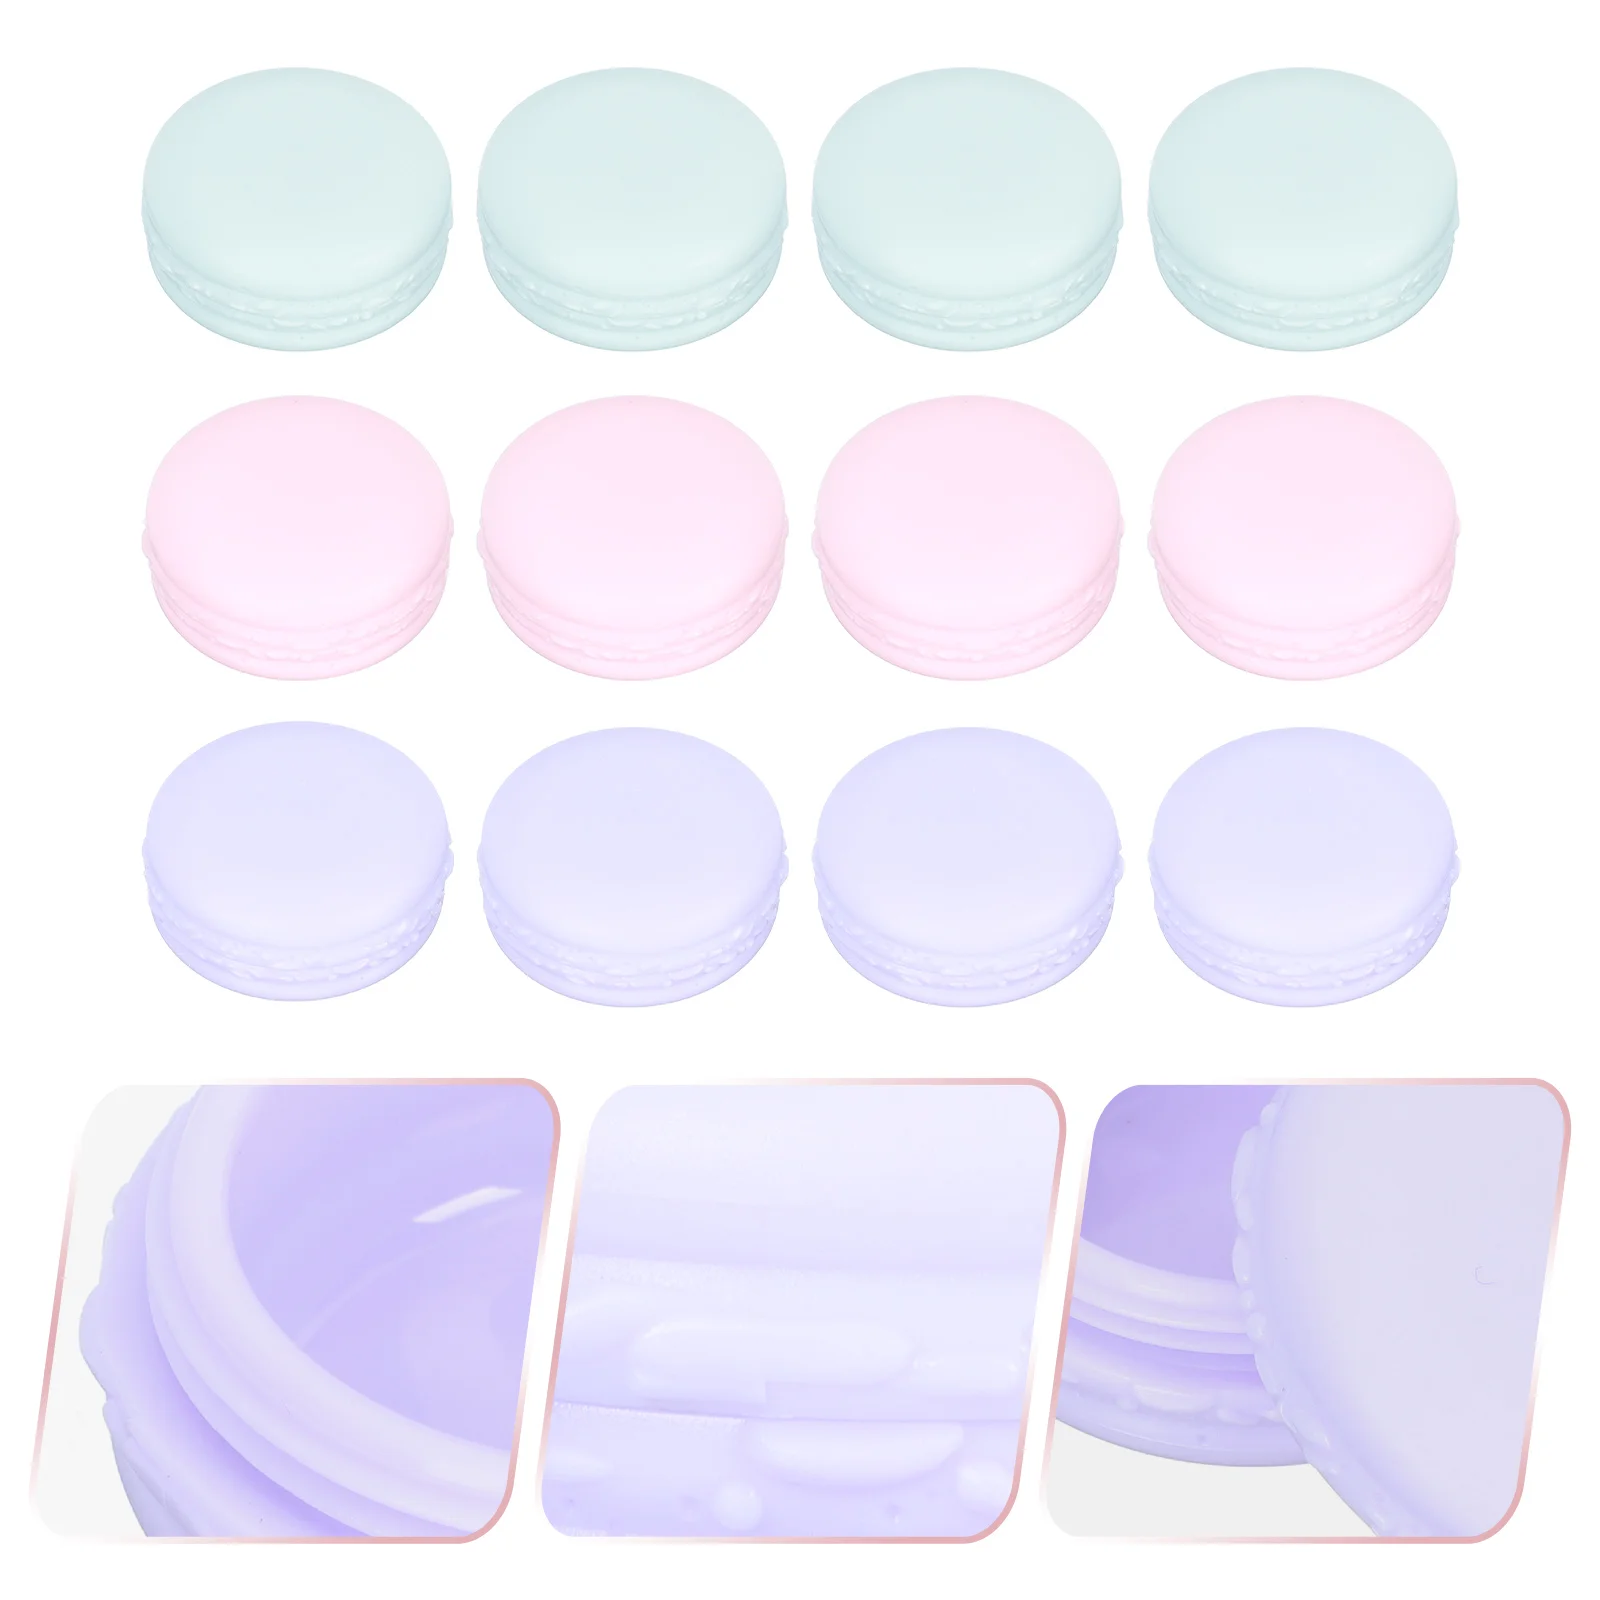 30 Pcs Cream Box Lotion Container Round Clear Jar Portable Empty Makeup Box Clear Container Plastic Makeup Cream Jar Travel